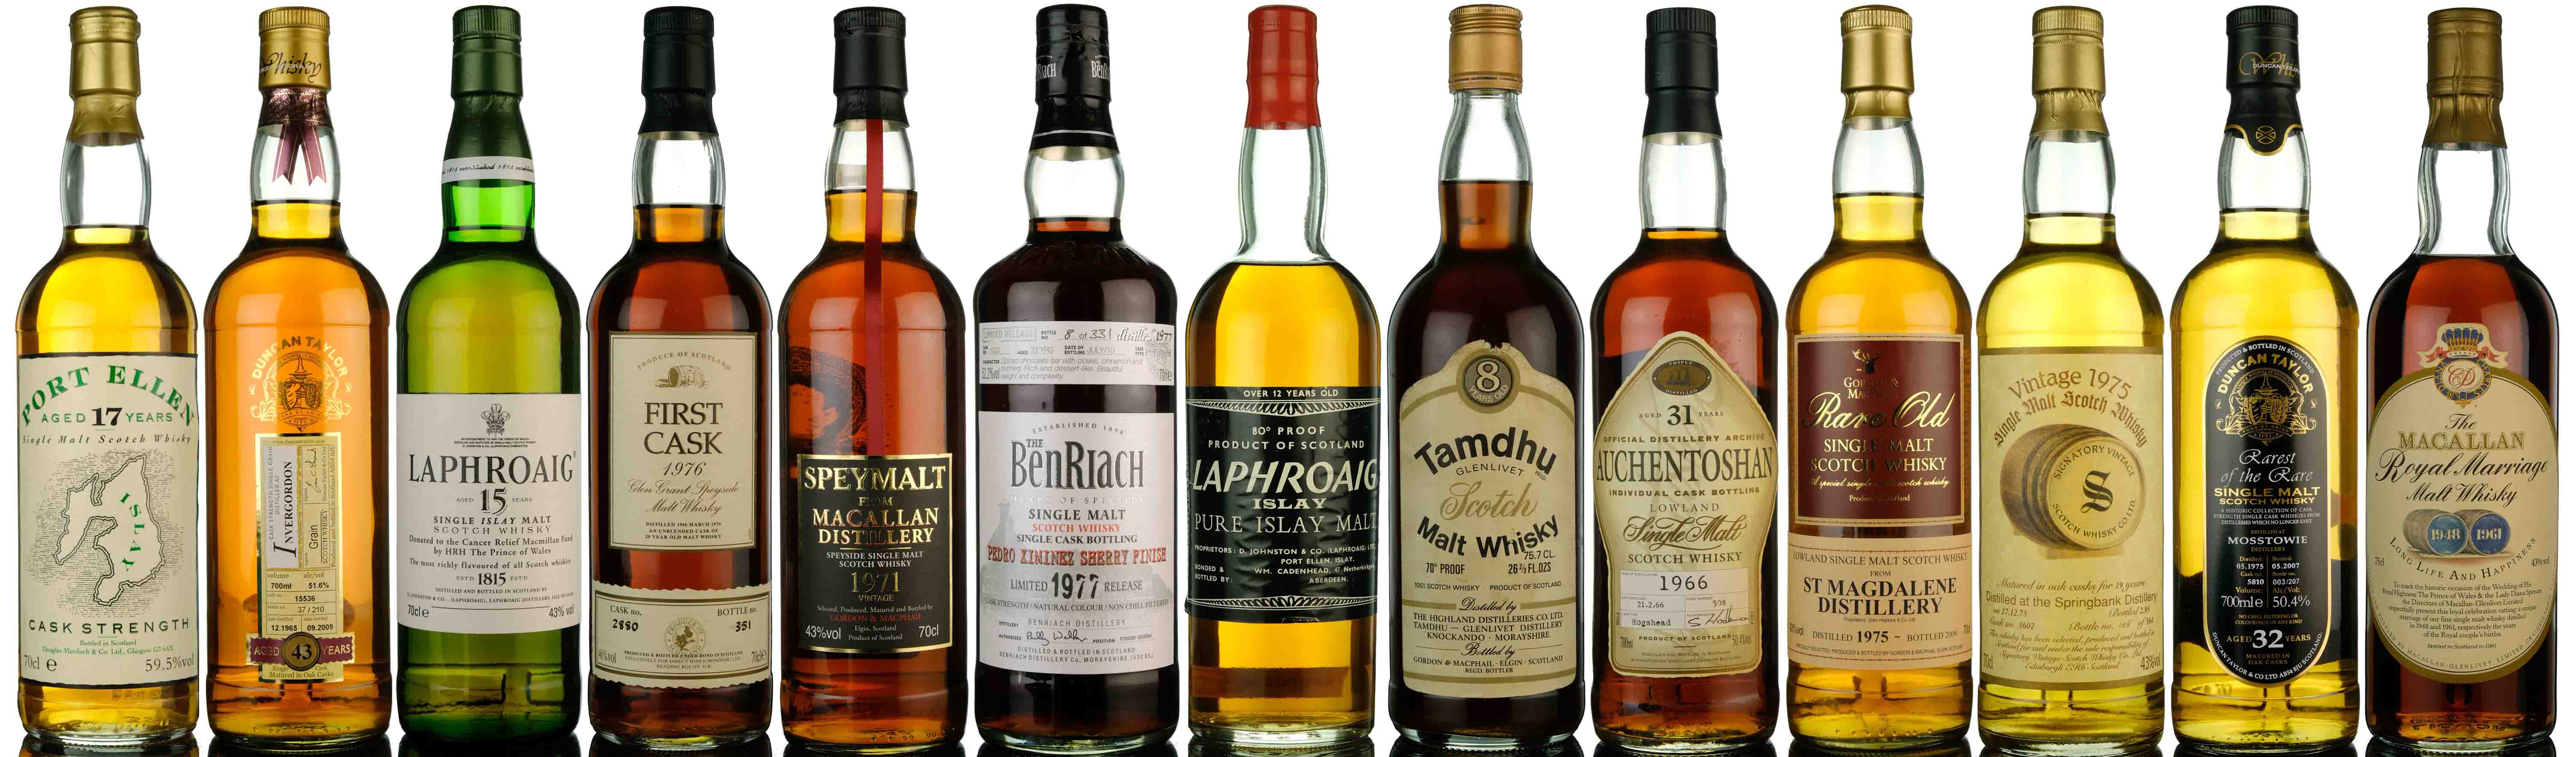 October Whisky Auction